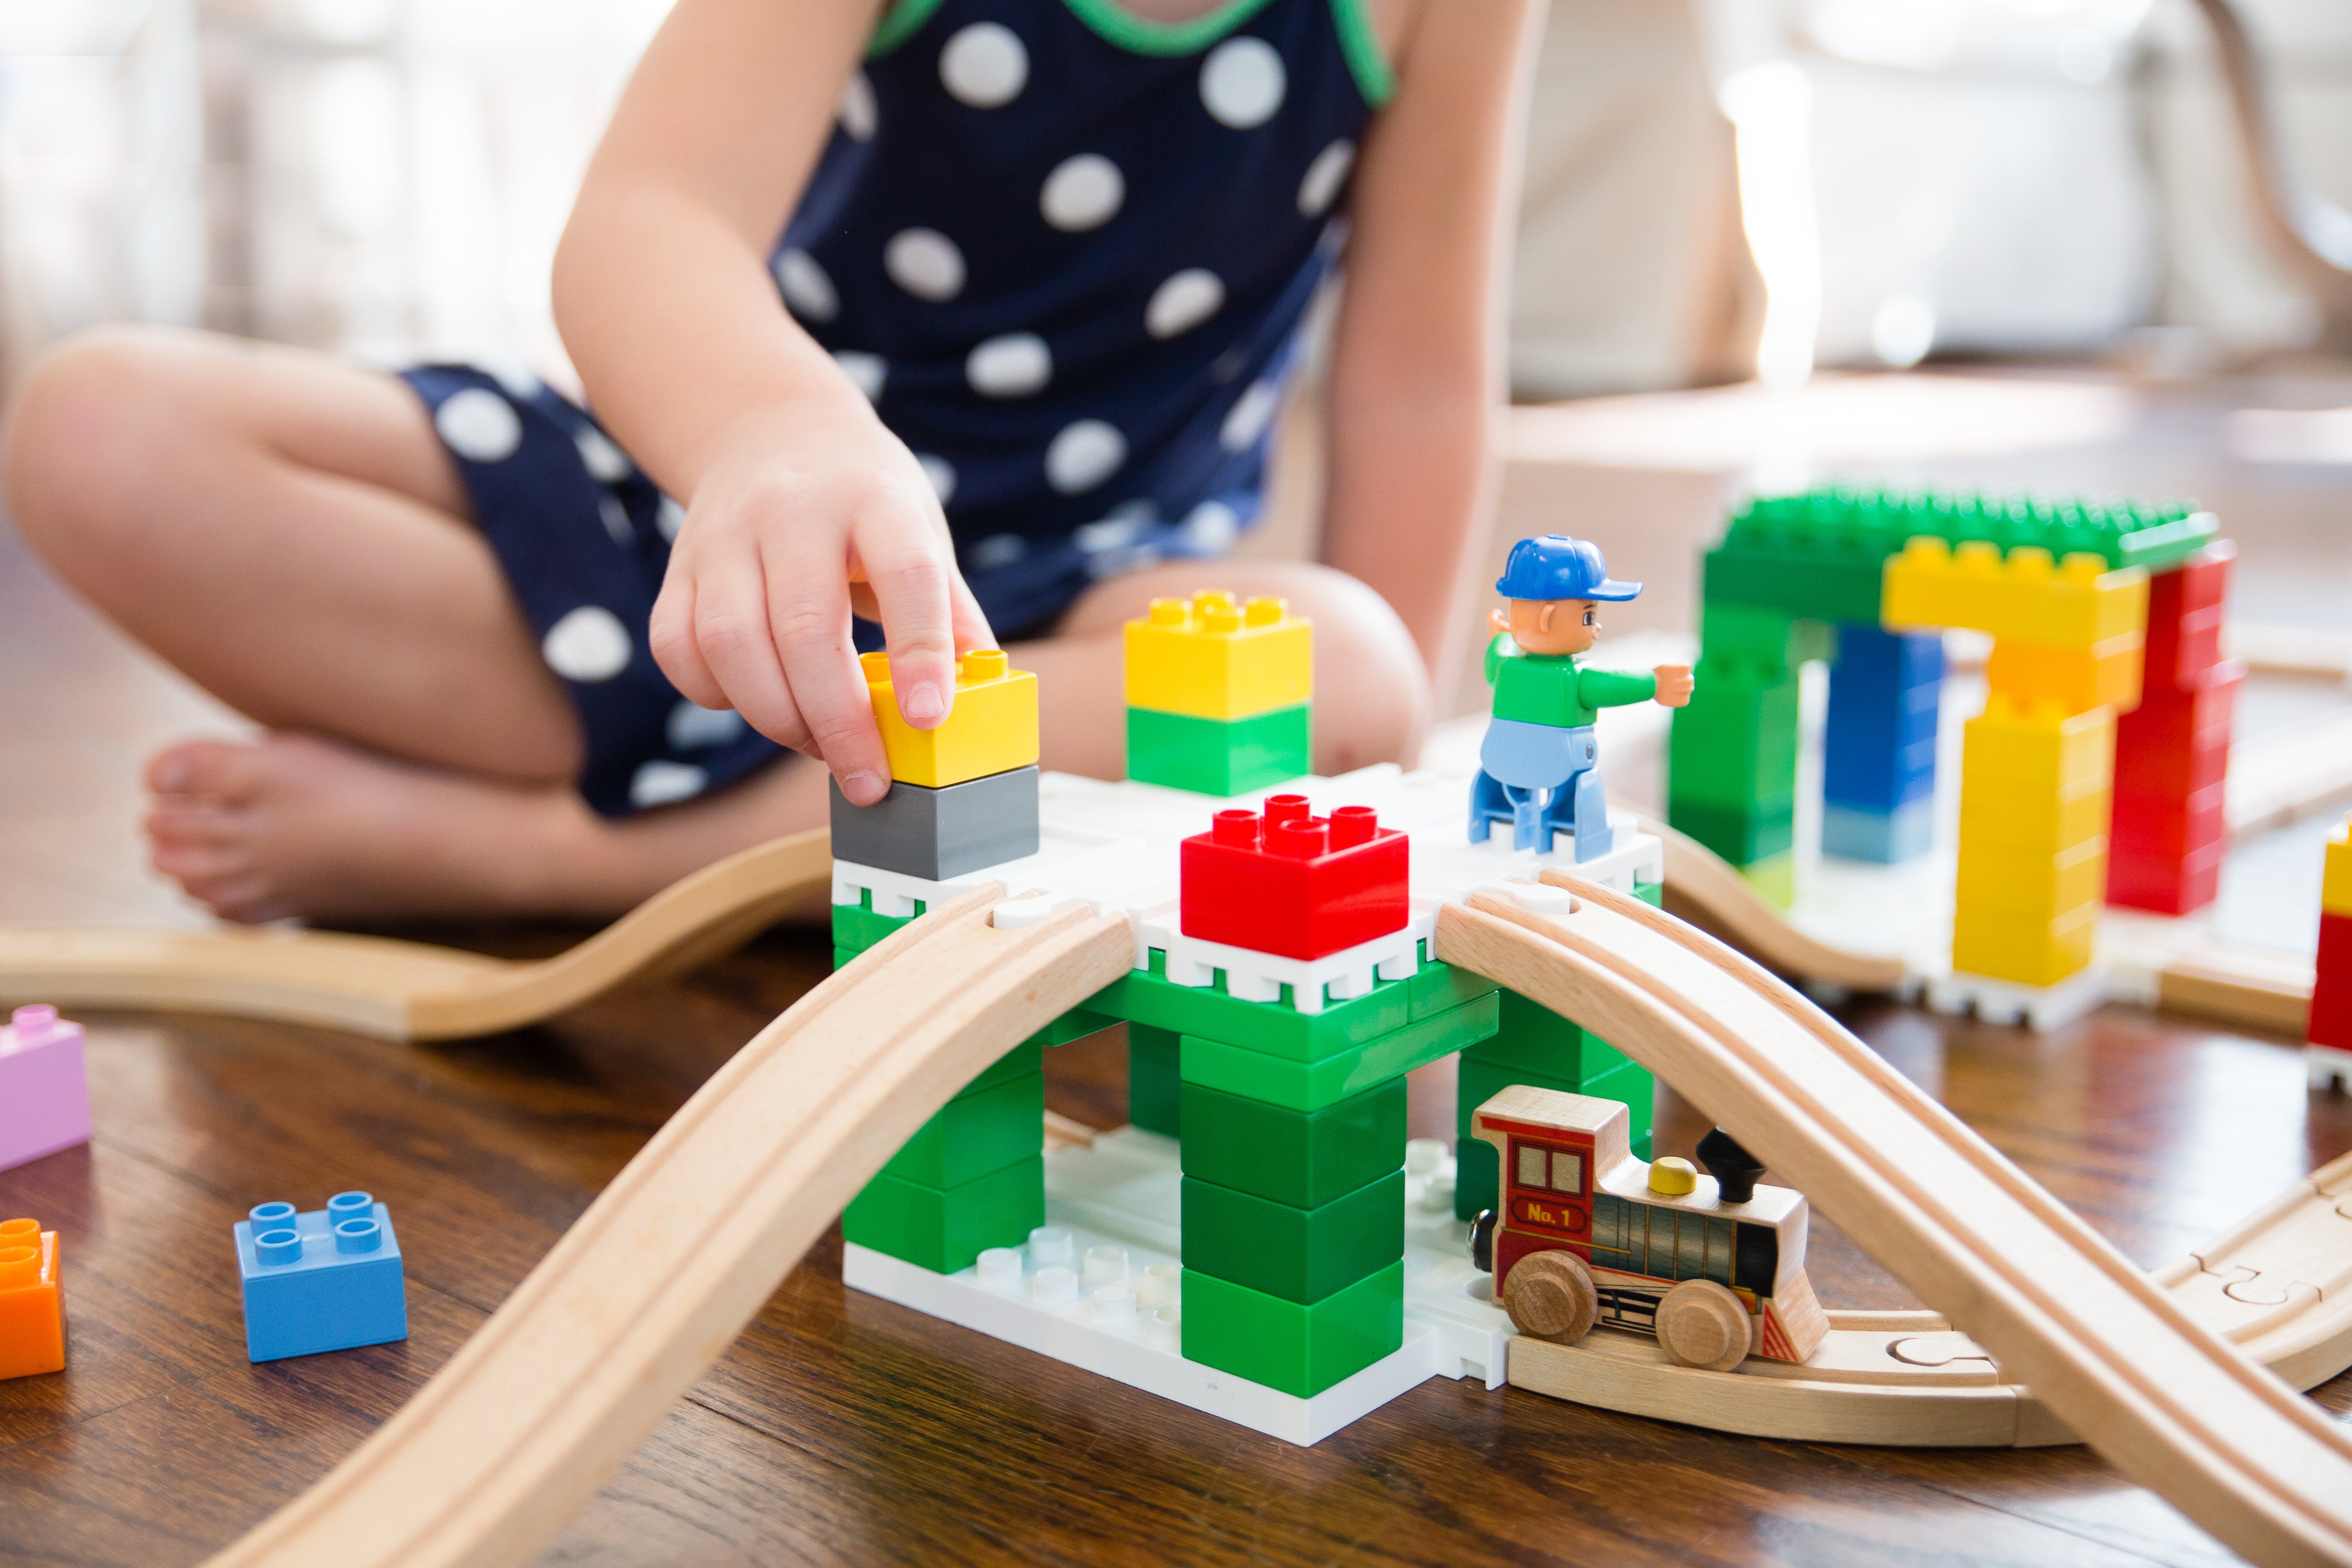 Building with Dreamup Toys Wooden Railway Block Platforms